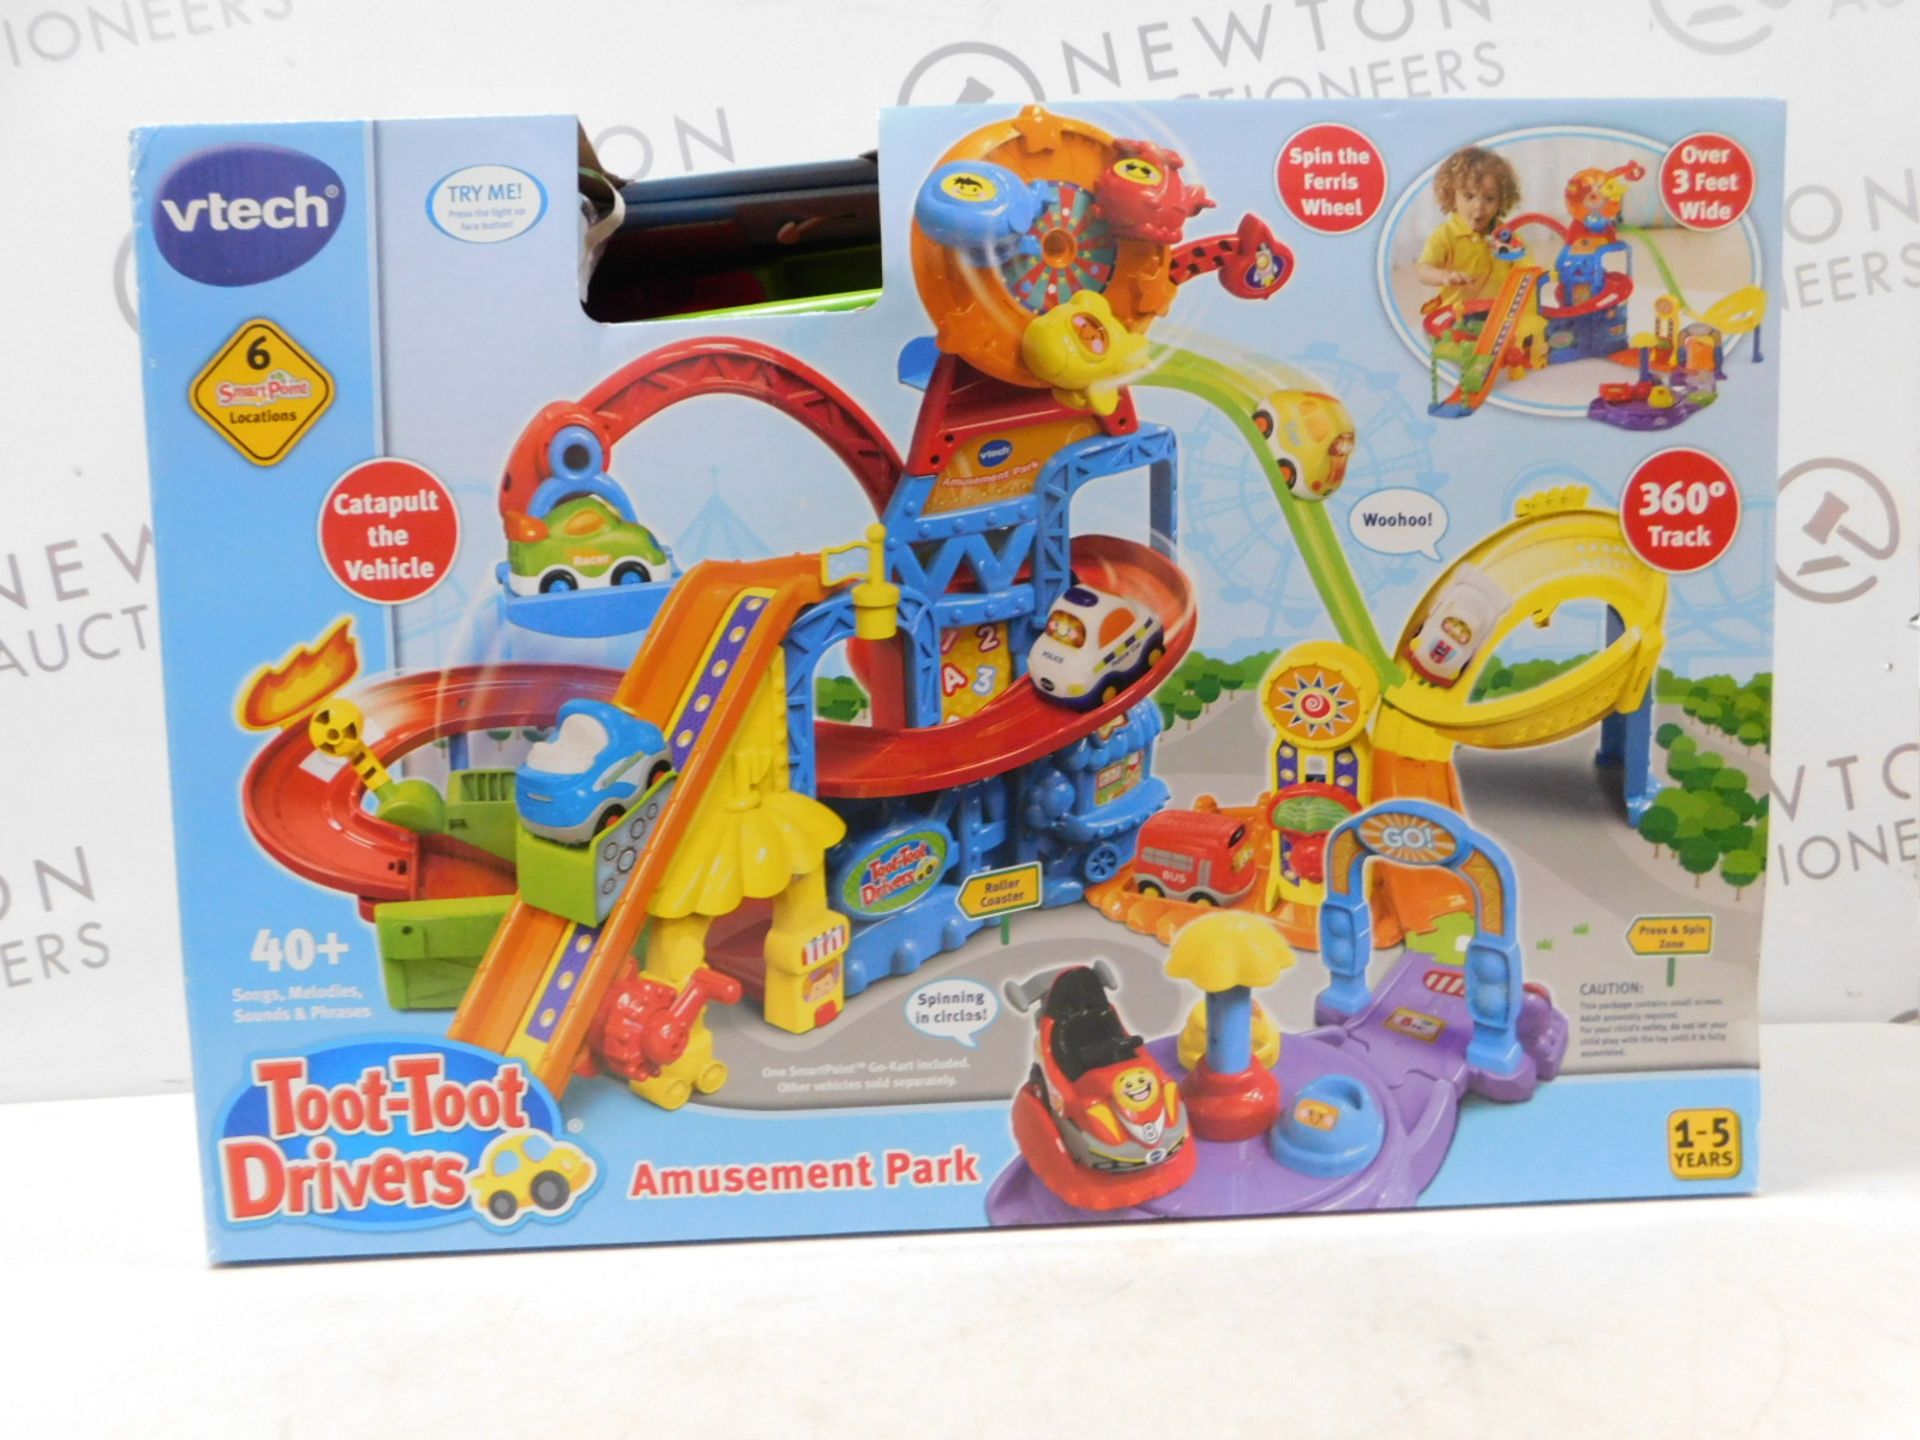 1 BOXED VTECH TOOT-TOOT DRIVERS AMUSEMENT PARK RRP £39.99